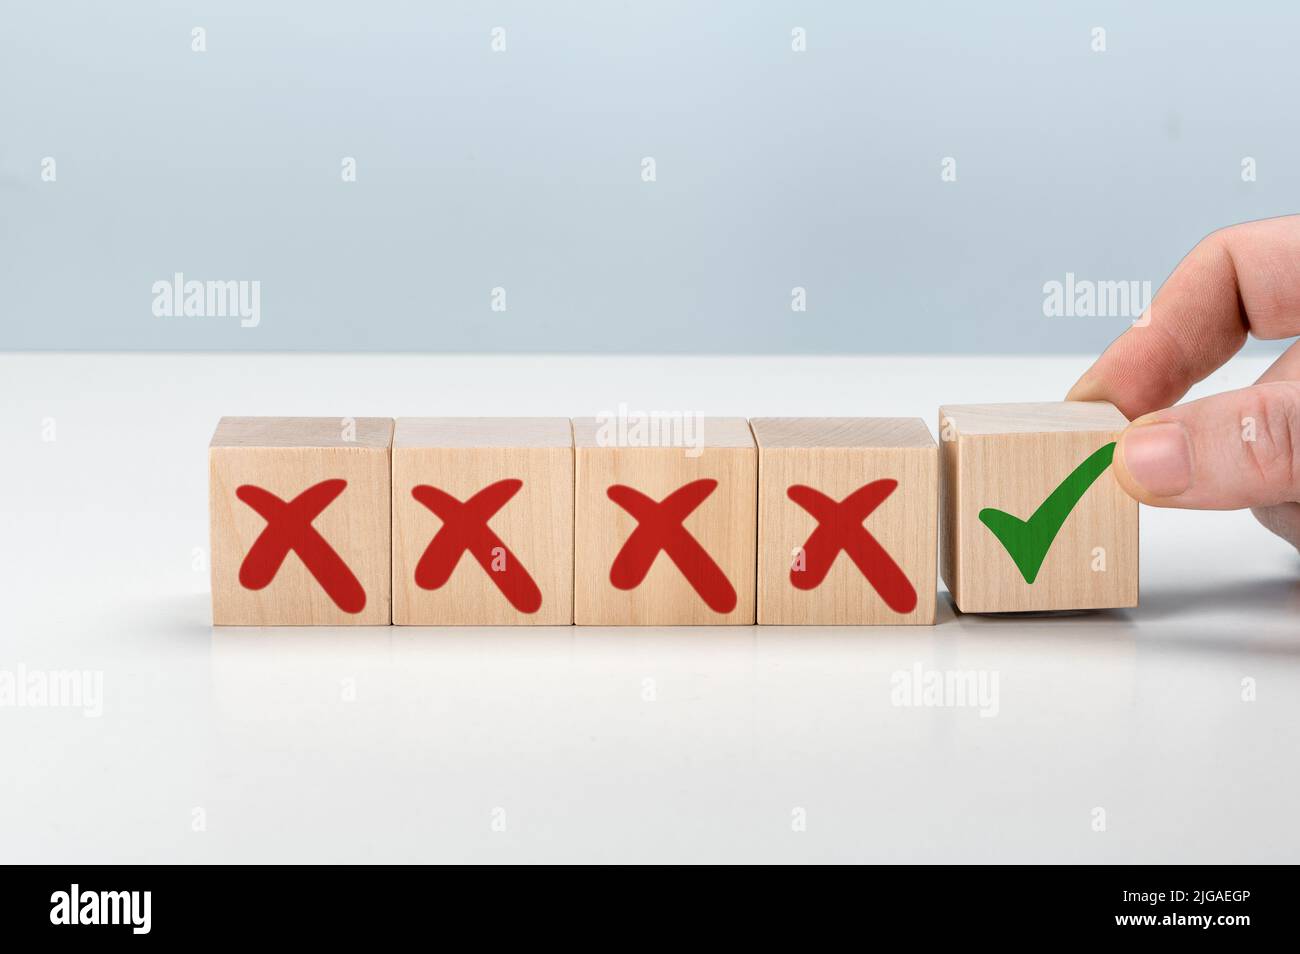 Man Hand selects checkbox with green checkmark from row of multiple boxes with red crosses. Pro and contra or Accept and Decline. Strategy of choice. Stock Photo